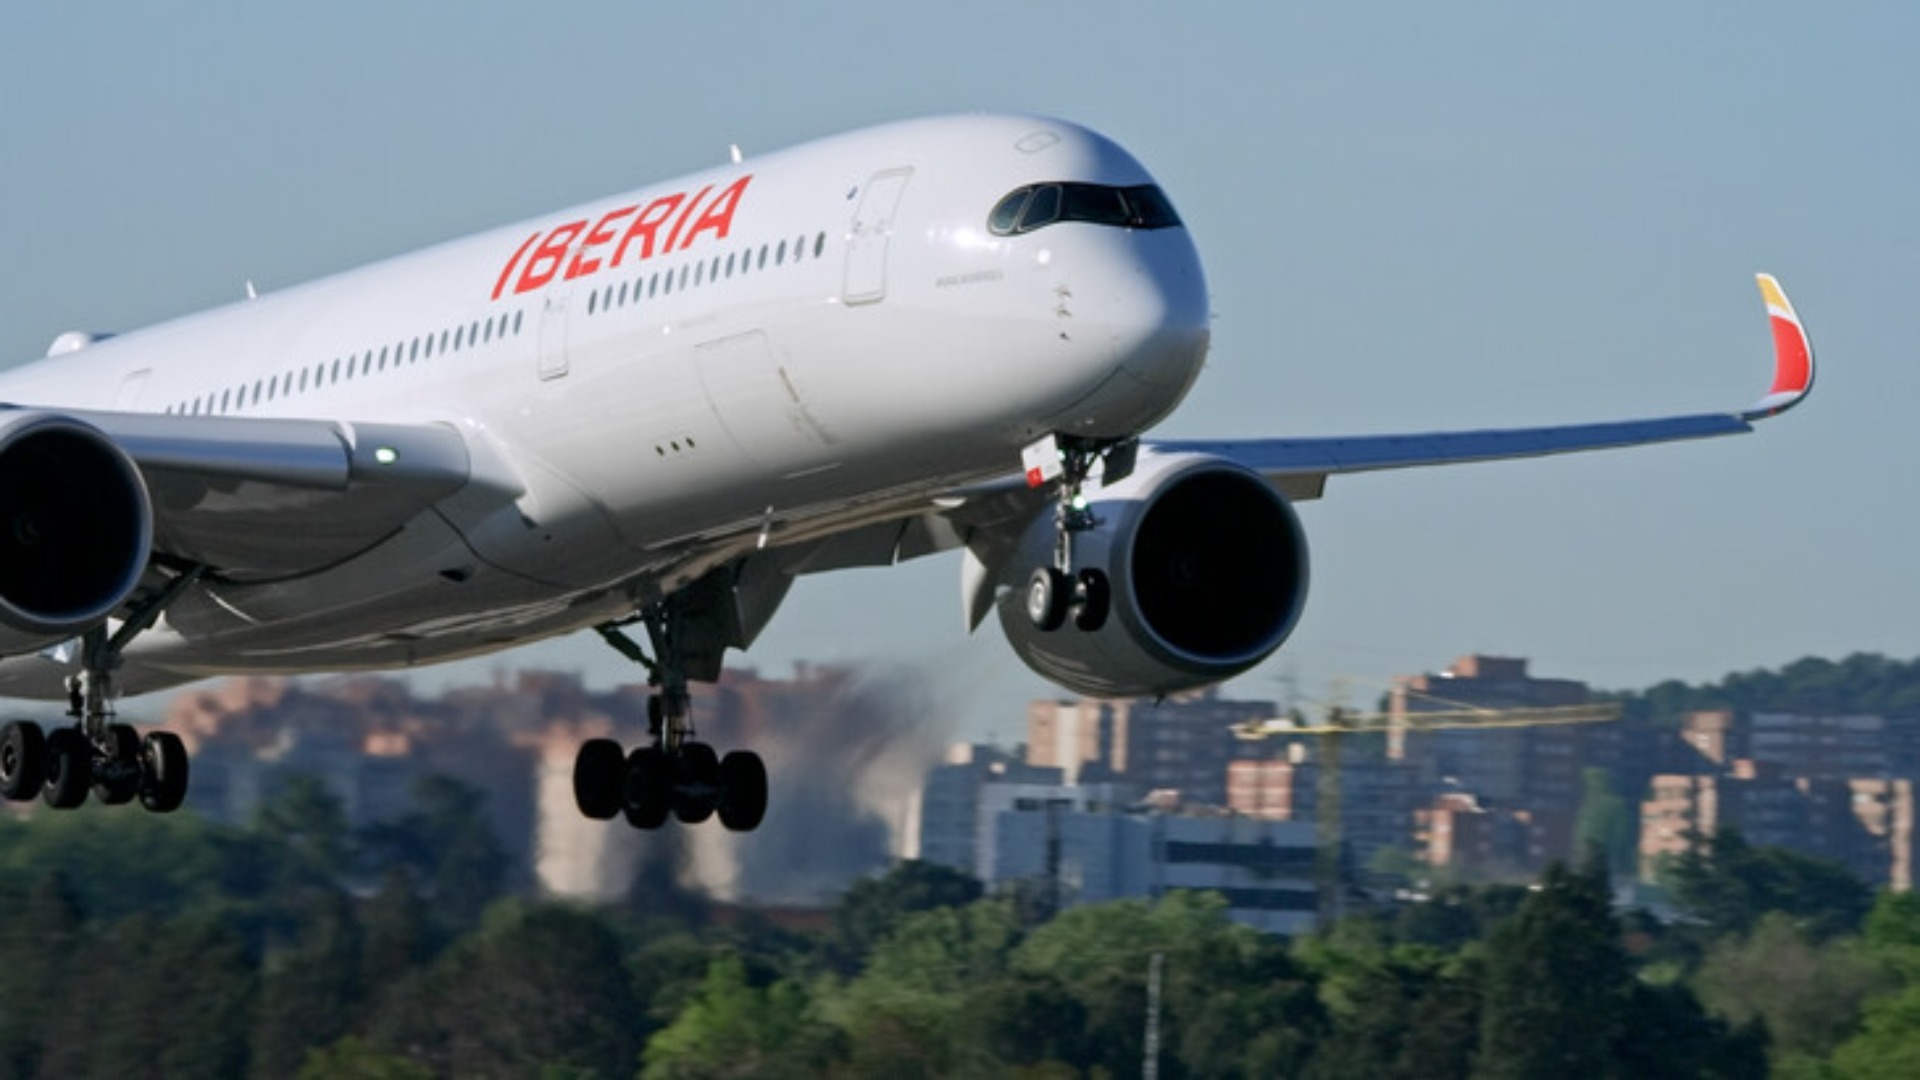 Iberia and Volaris Expand Connectivity Between Europe and Mexico with Codeshare Agreement